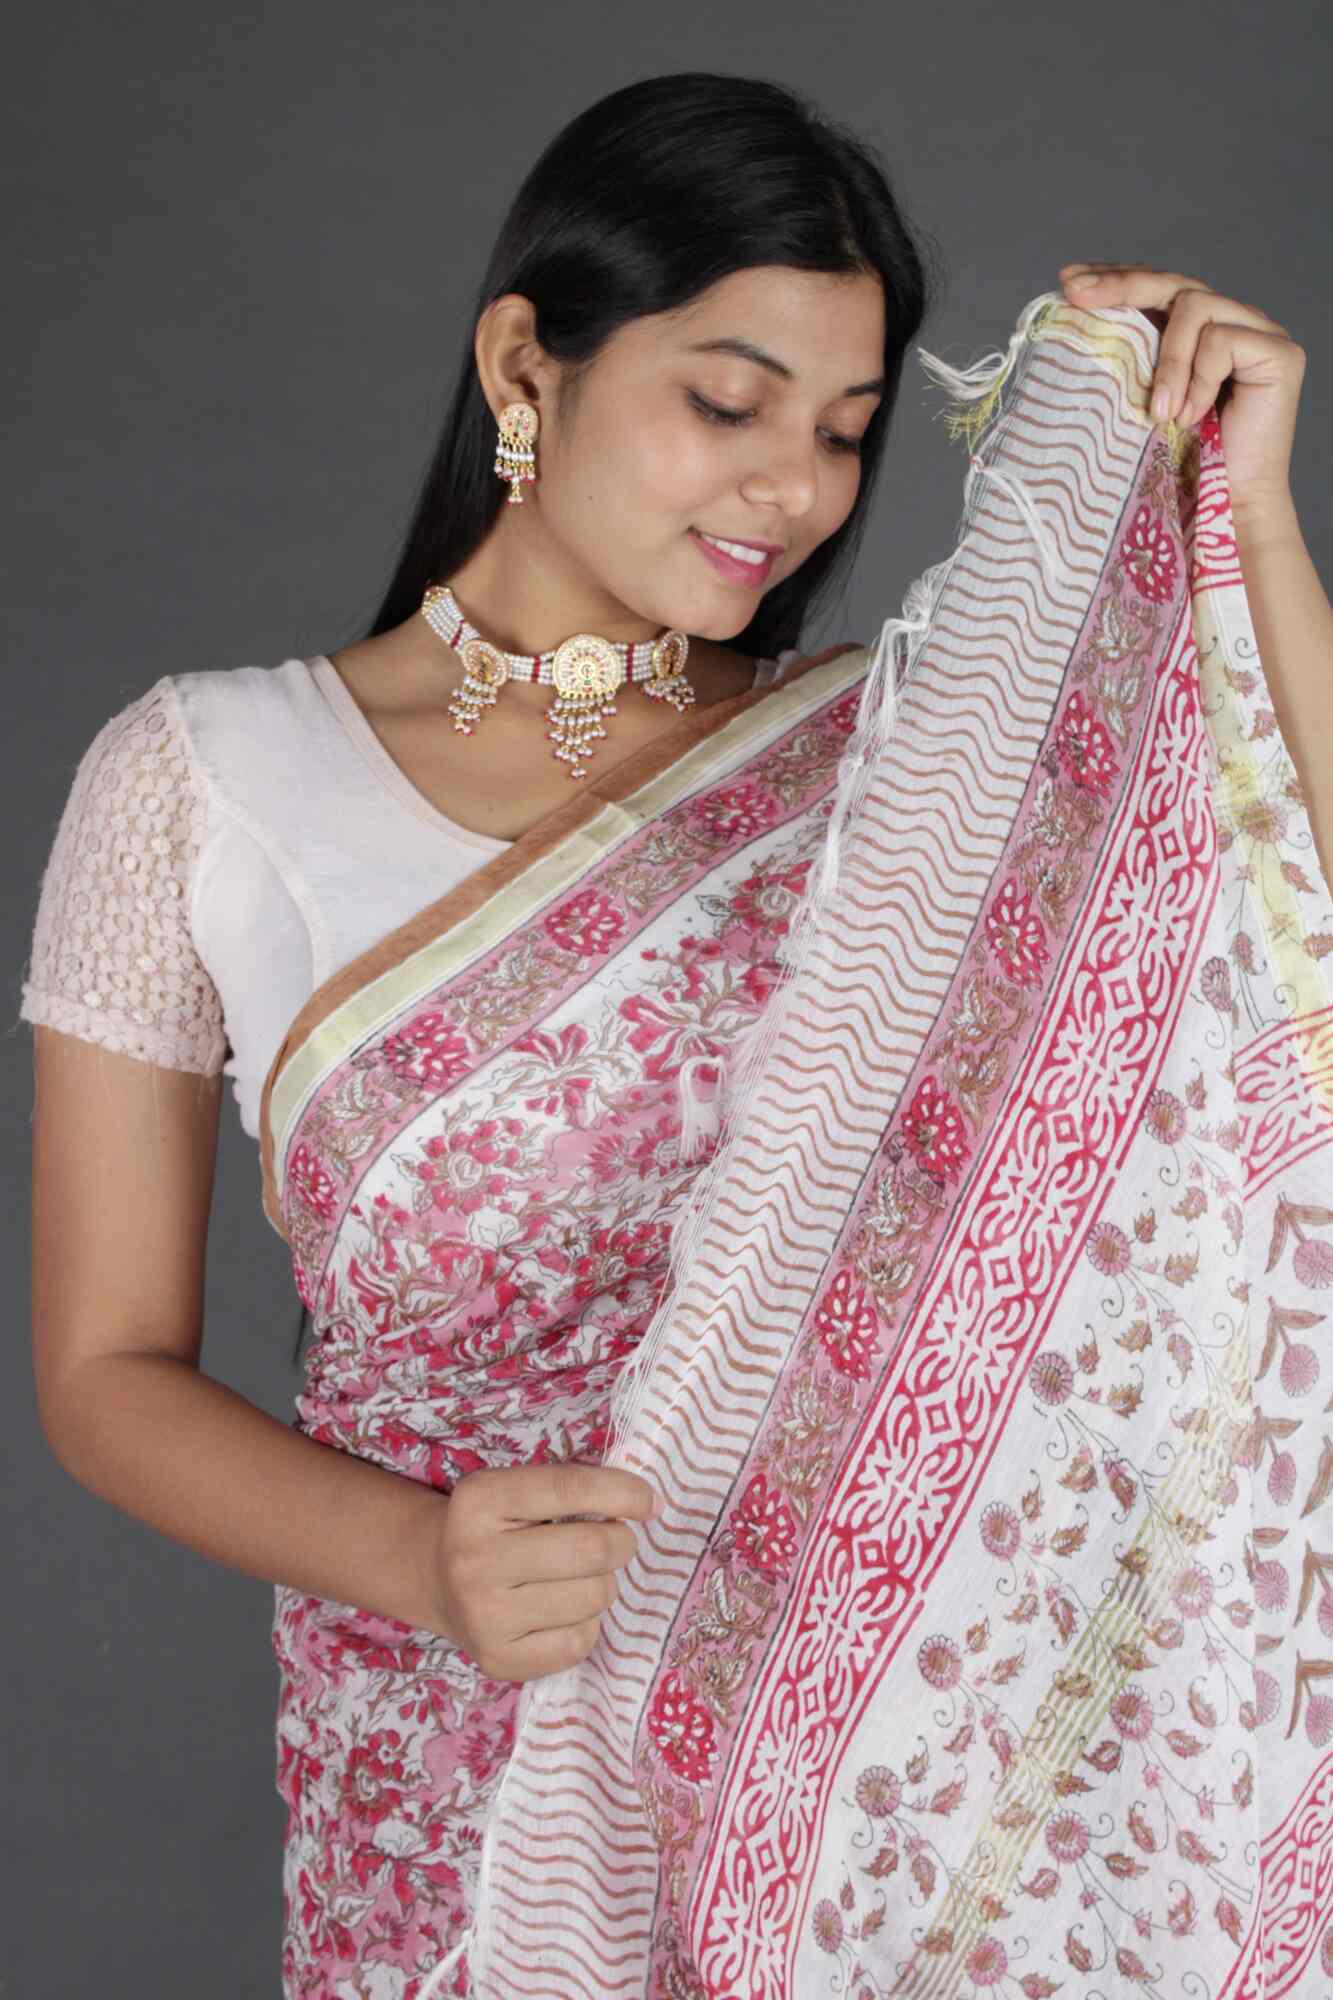 PINK & WHITE SOFT CHANDERI COTTON FLORAL PRINTED WRAP IN 1 MINUTE SAREE - Isadora Life Online Shopping Store